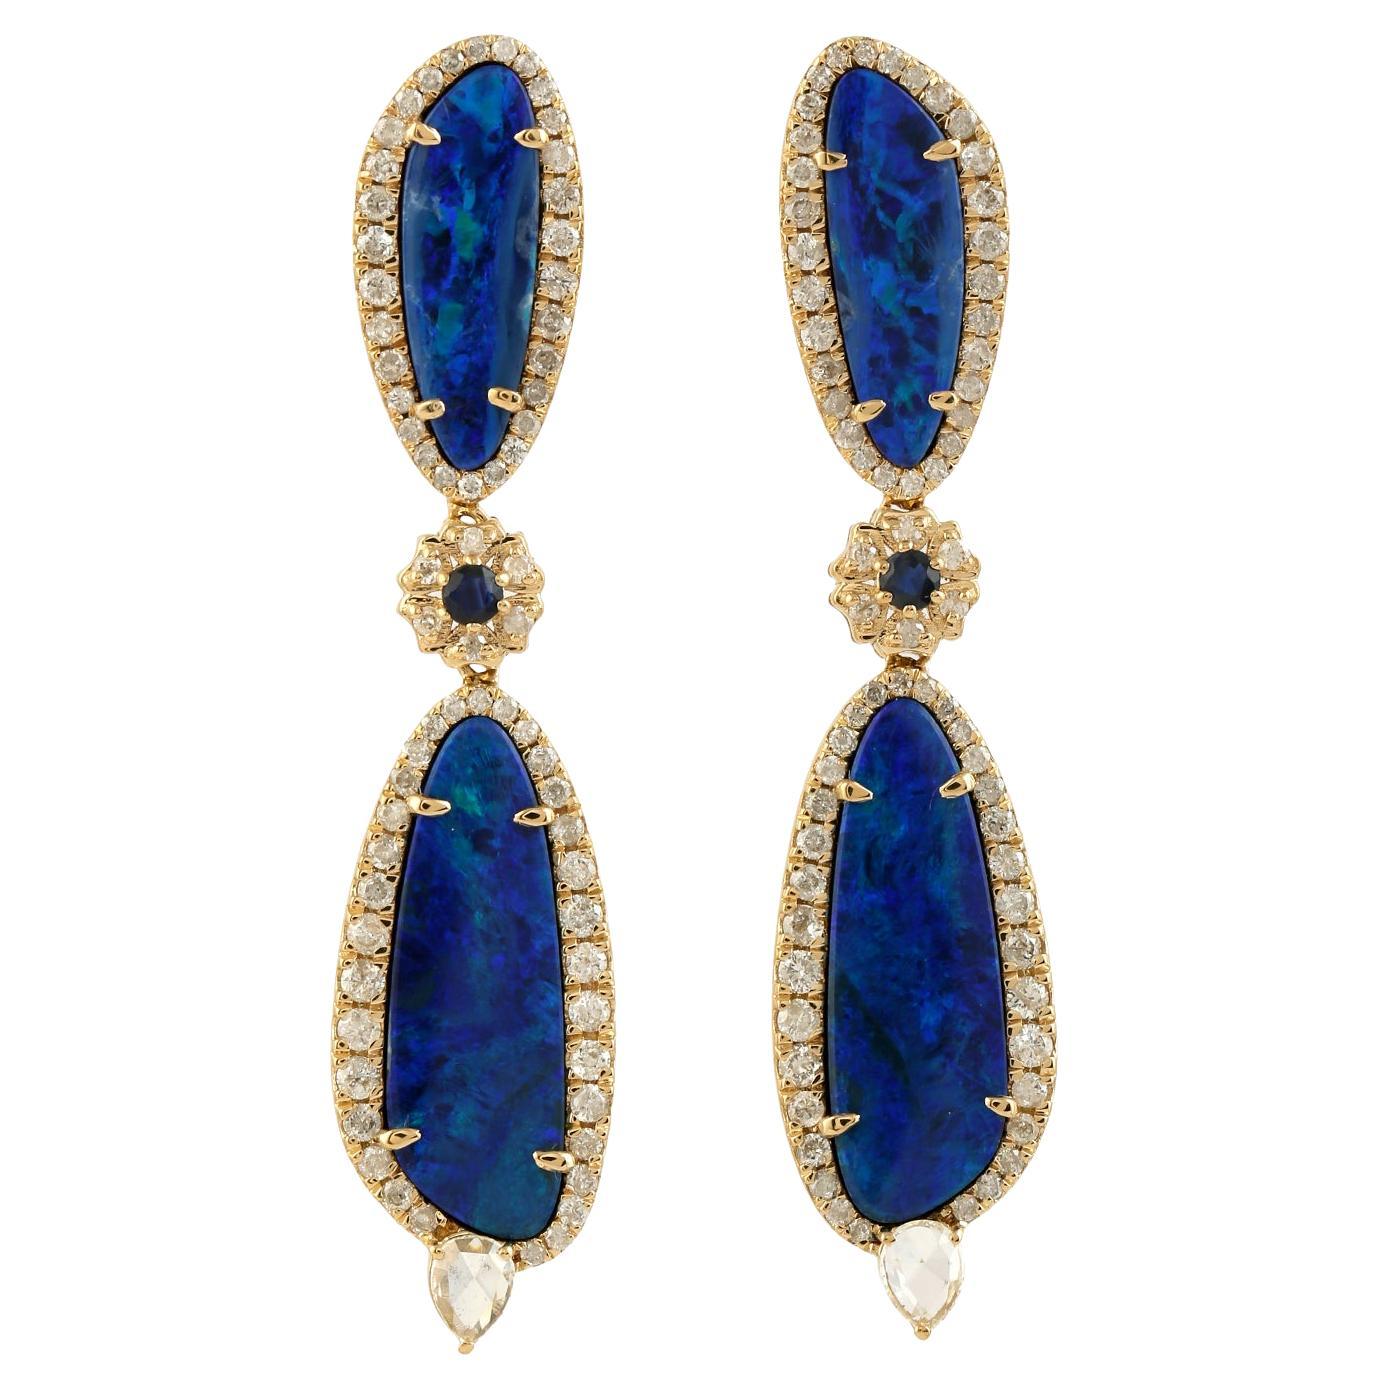 5.65 ct Opal Dangle Earrings With Sapphire & Diamonds Made In 18k Yellow Gold For Sale